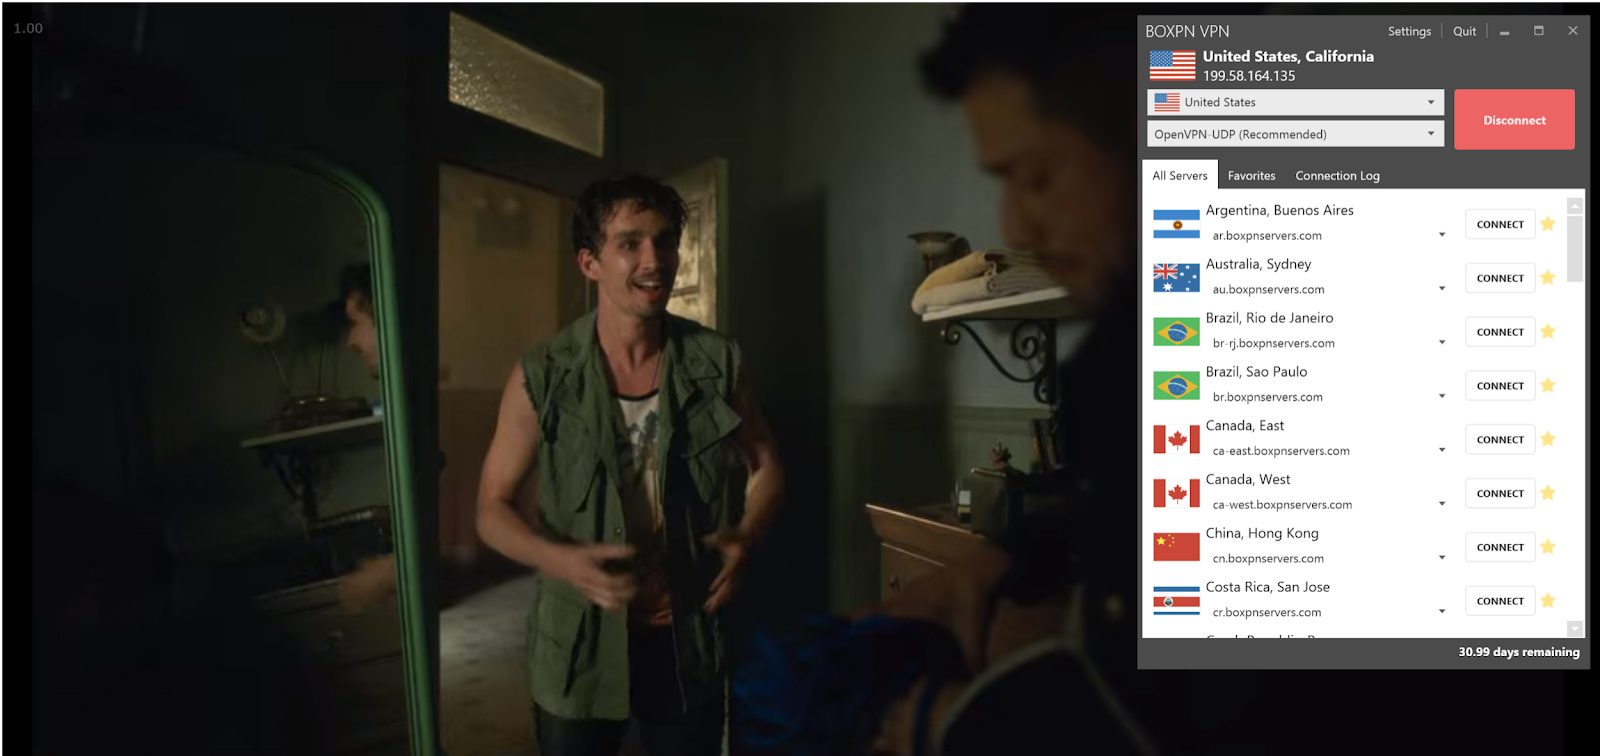 A screenshot of BoxPN VPN unblocking Netflix in the background.